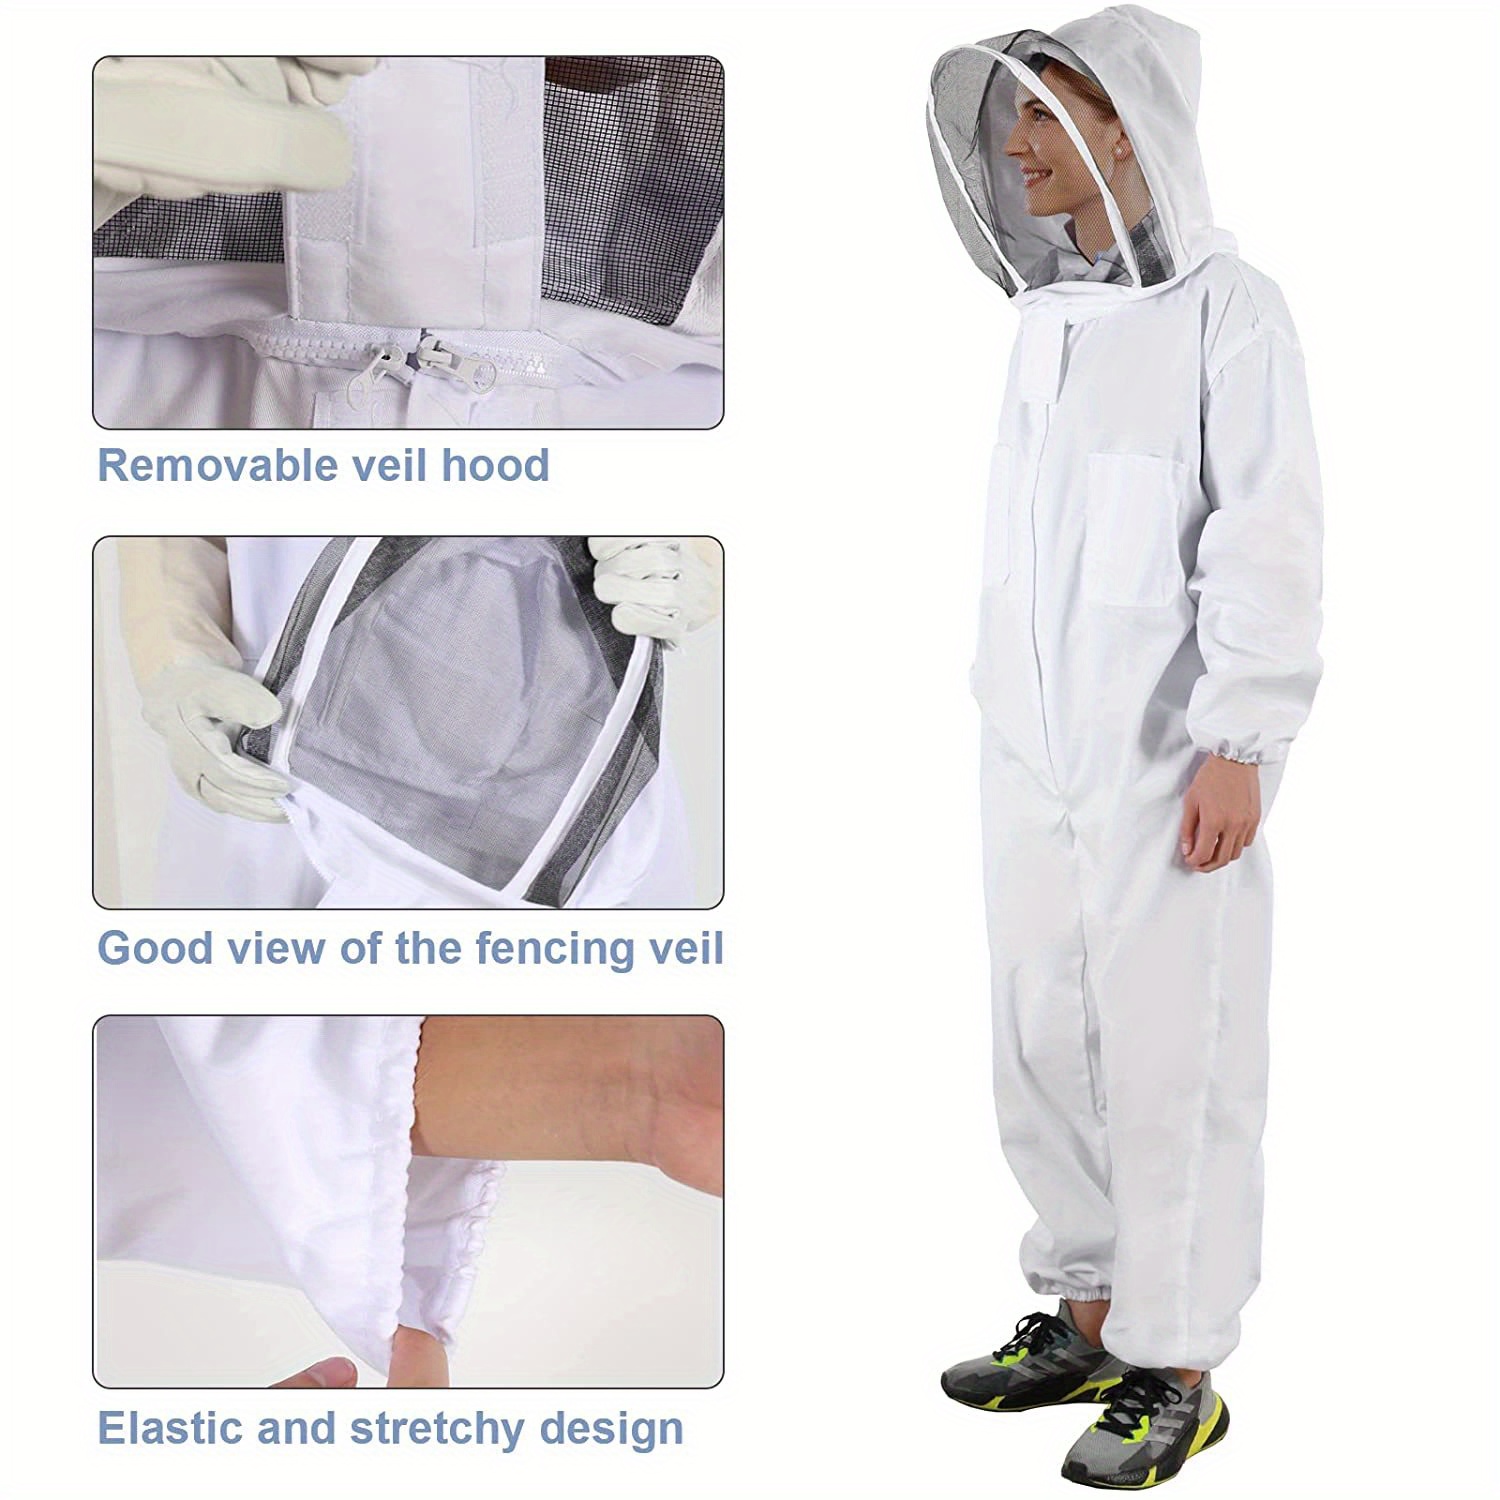 What Personal Protective Clothing Do Beekeepers Need?